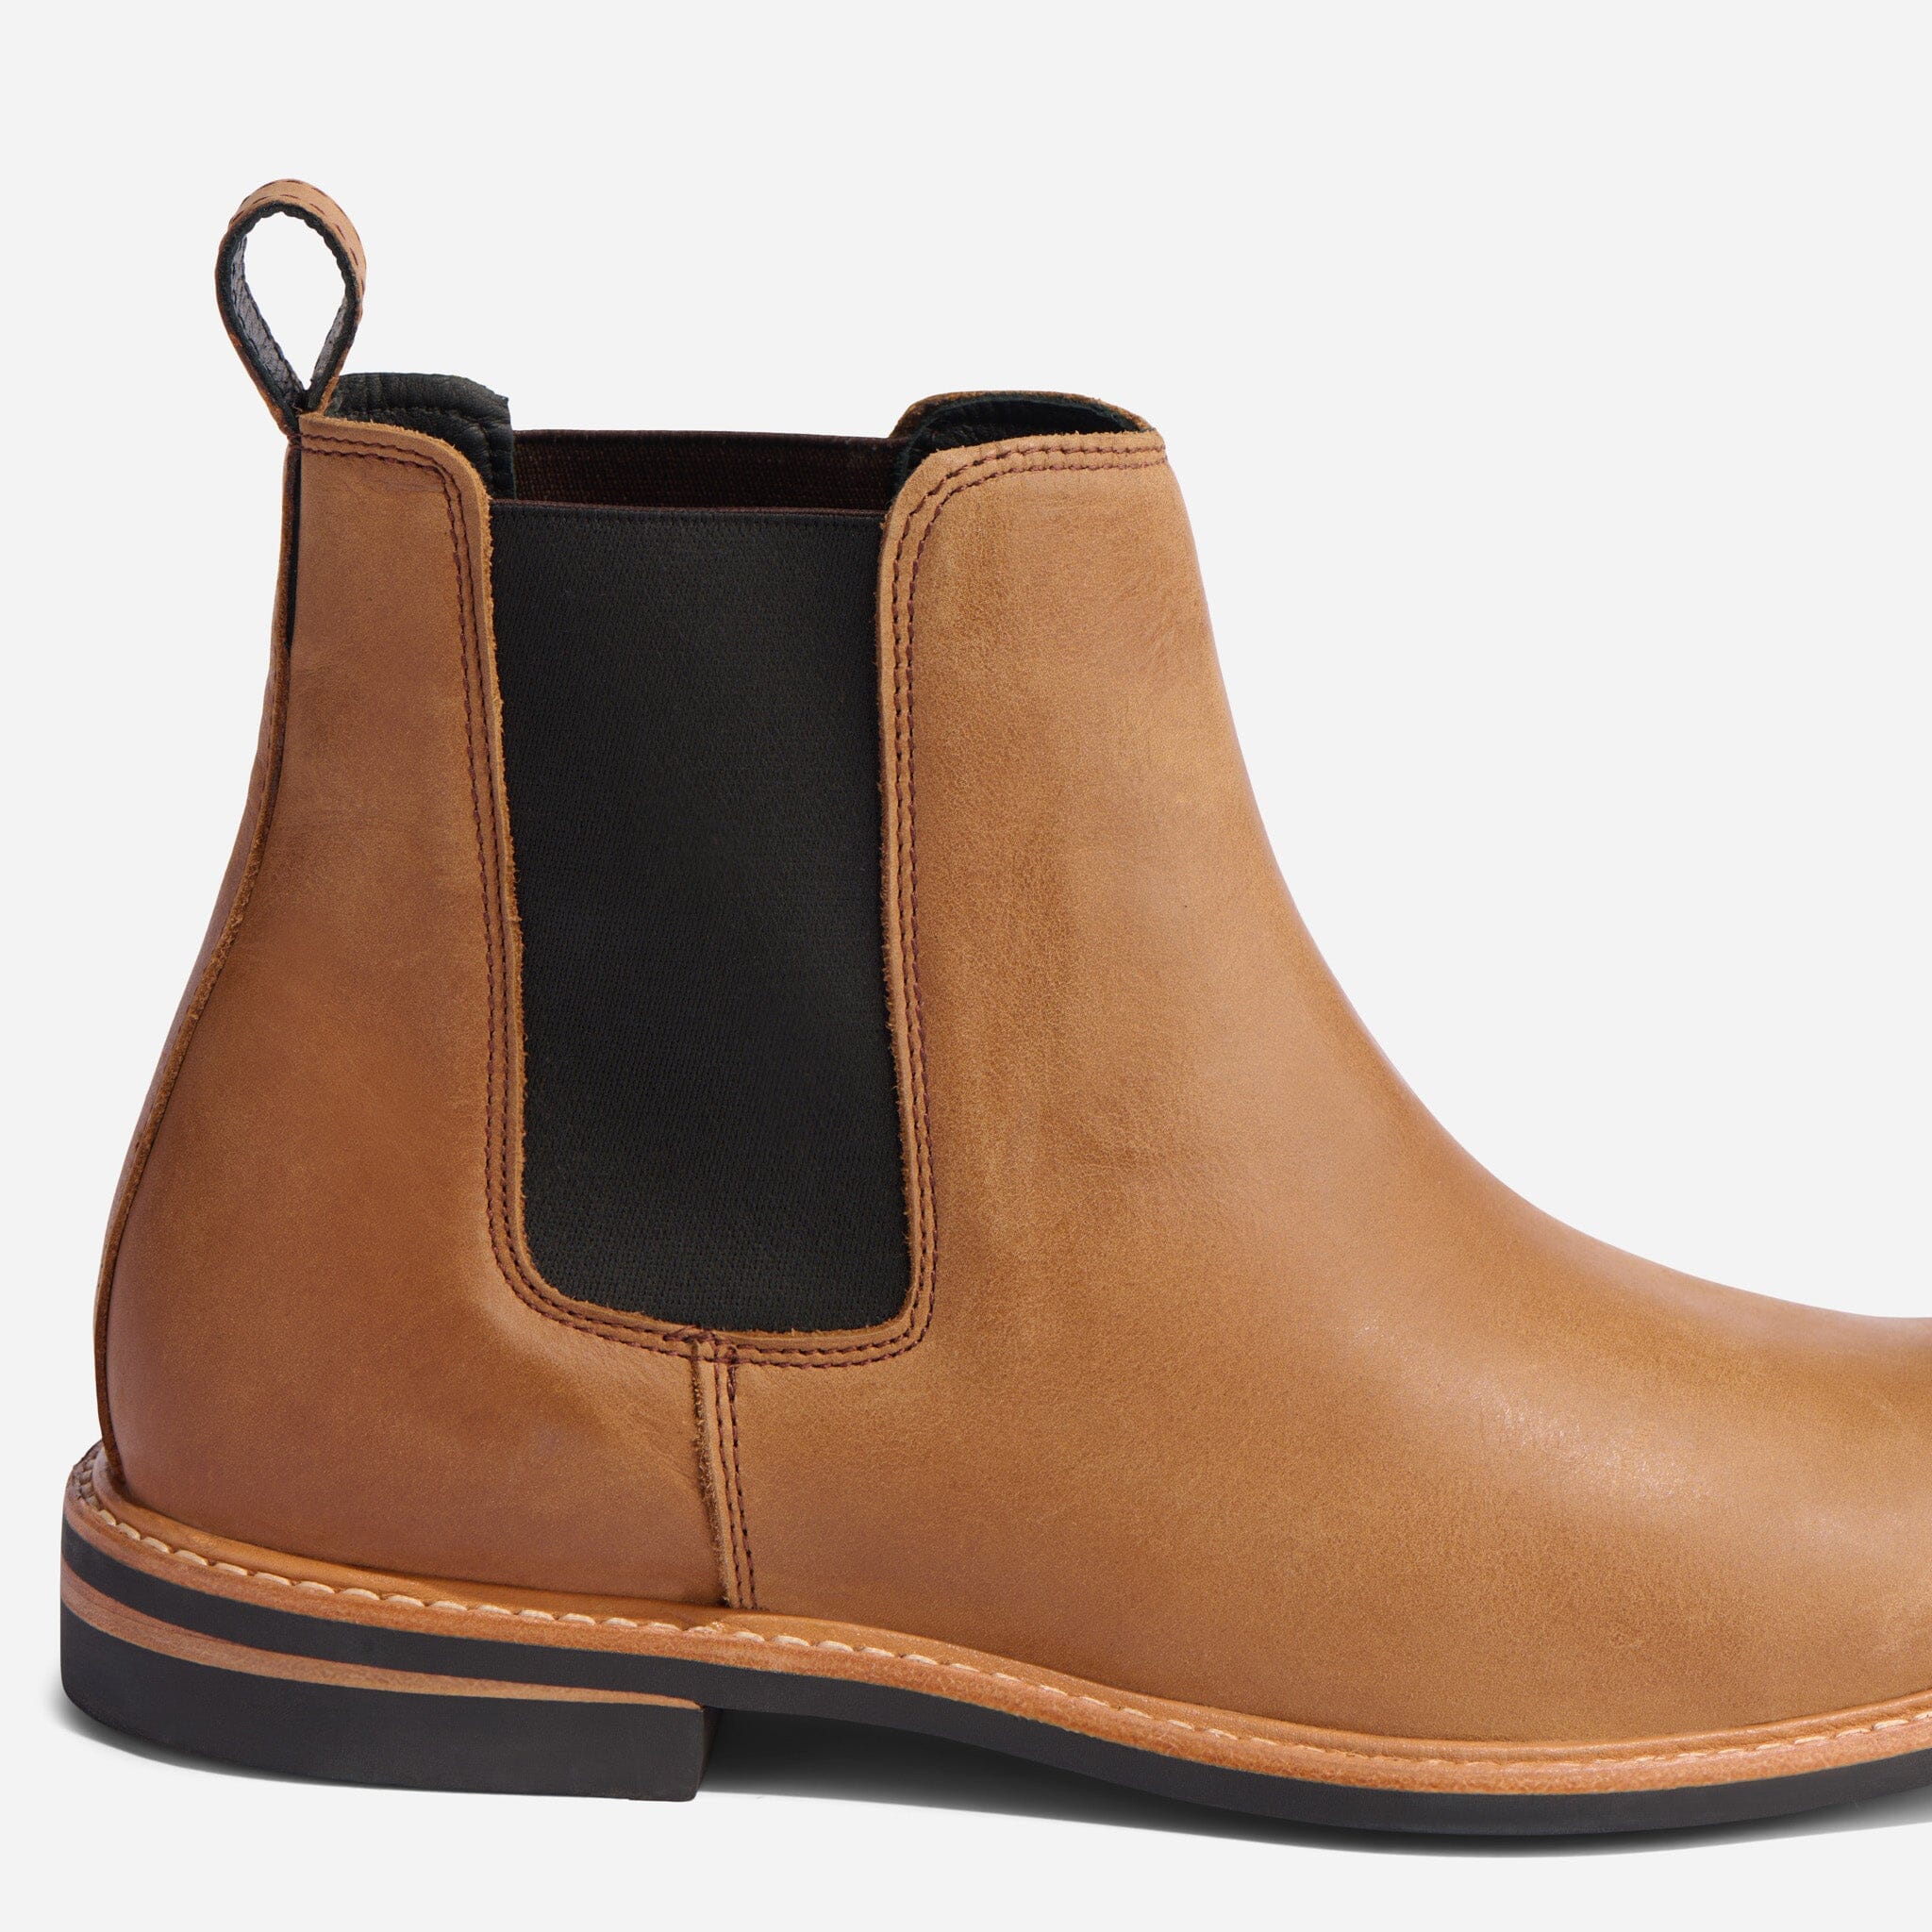 All-Weather Chelsea Boot Tobacco Men's Leather Chelsea Boot Nisolo 